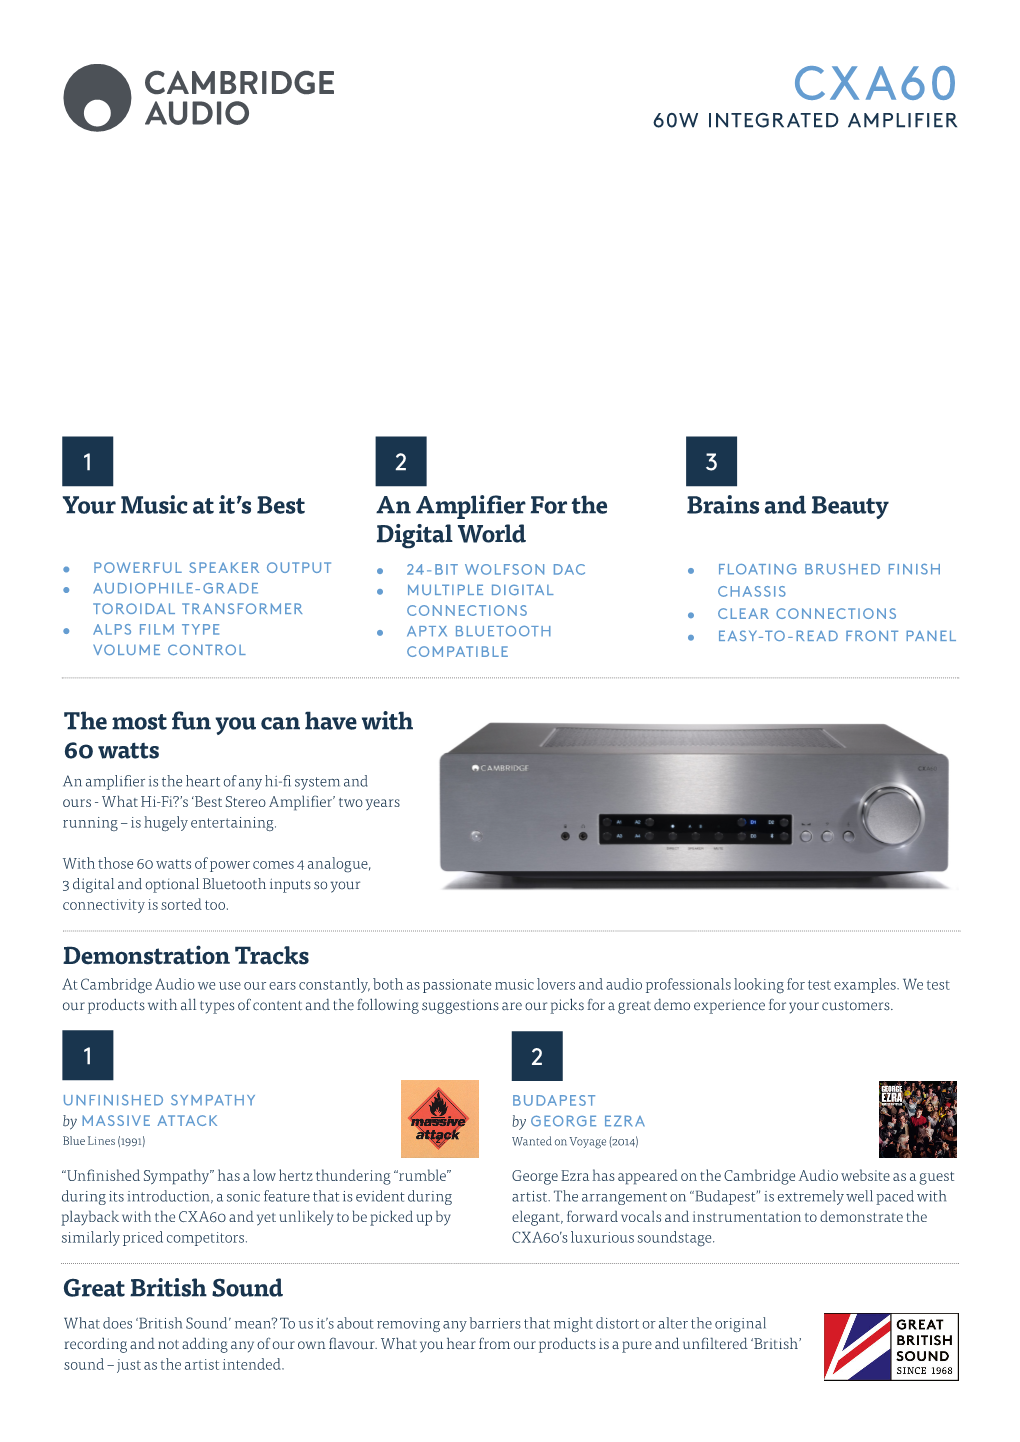 2 1 Your Music at It's Best an Amplifier for the Digital World Brains And